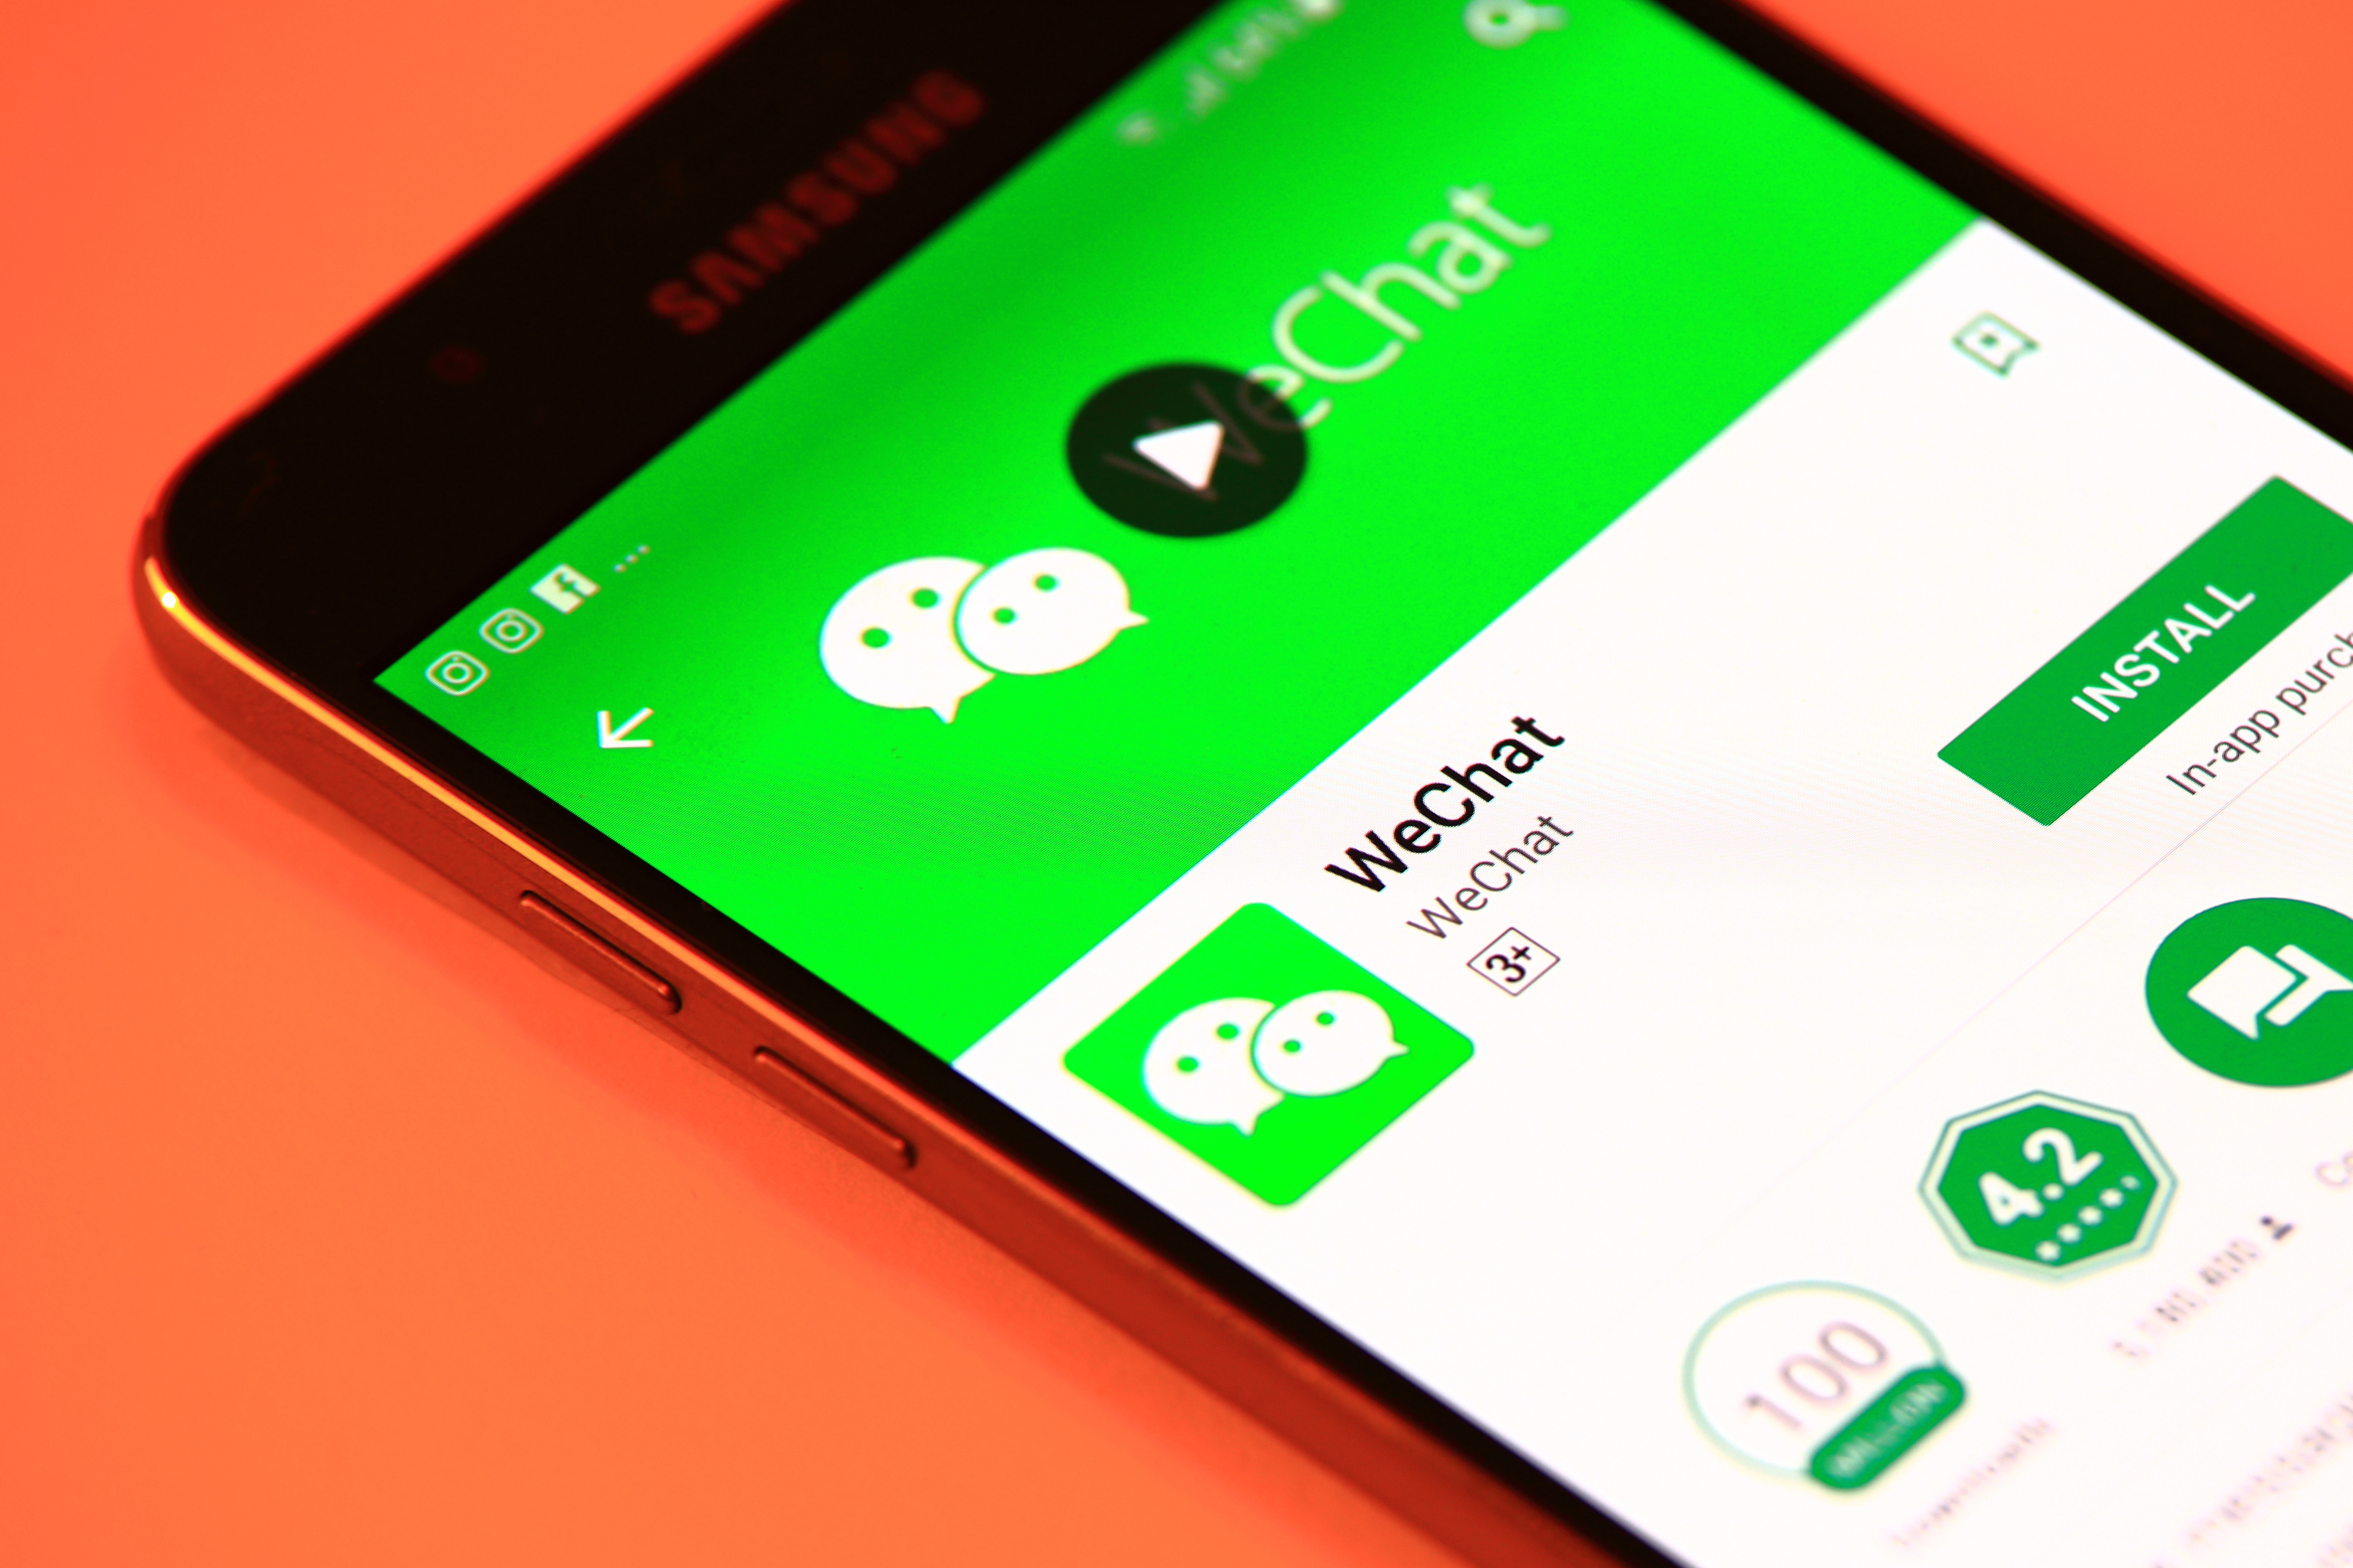 WeChat says that the number of its international and domestic users reached 1.15 billion last year. (Picture: Shutterstock)